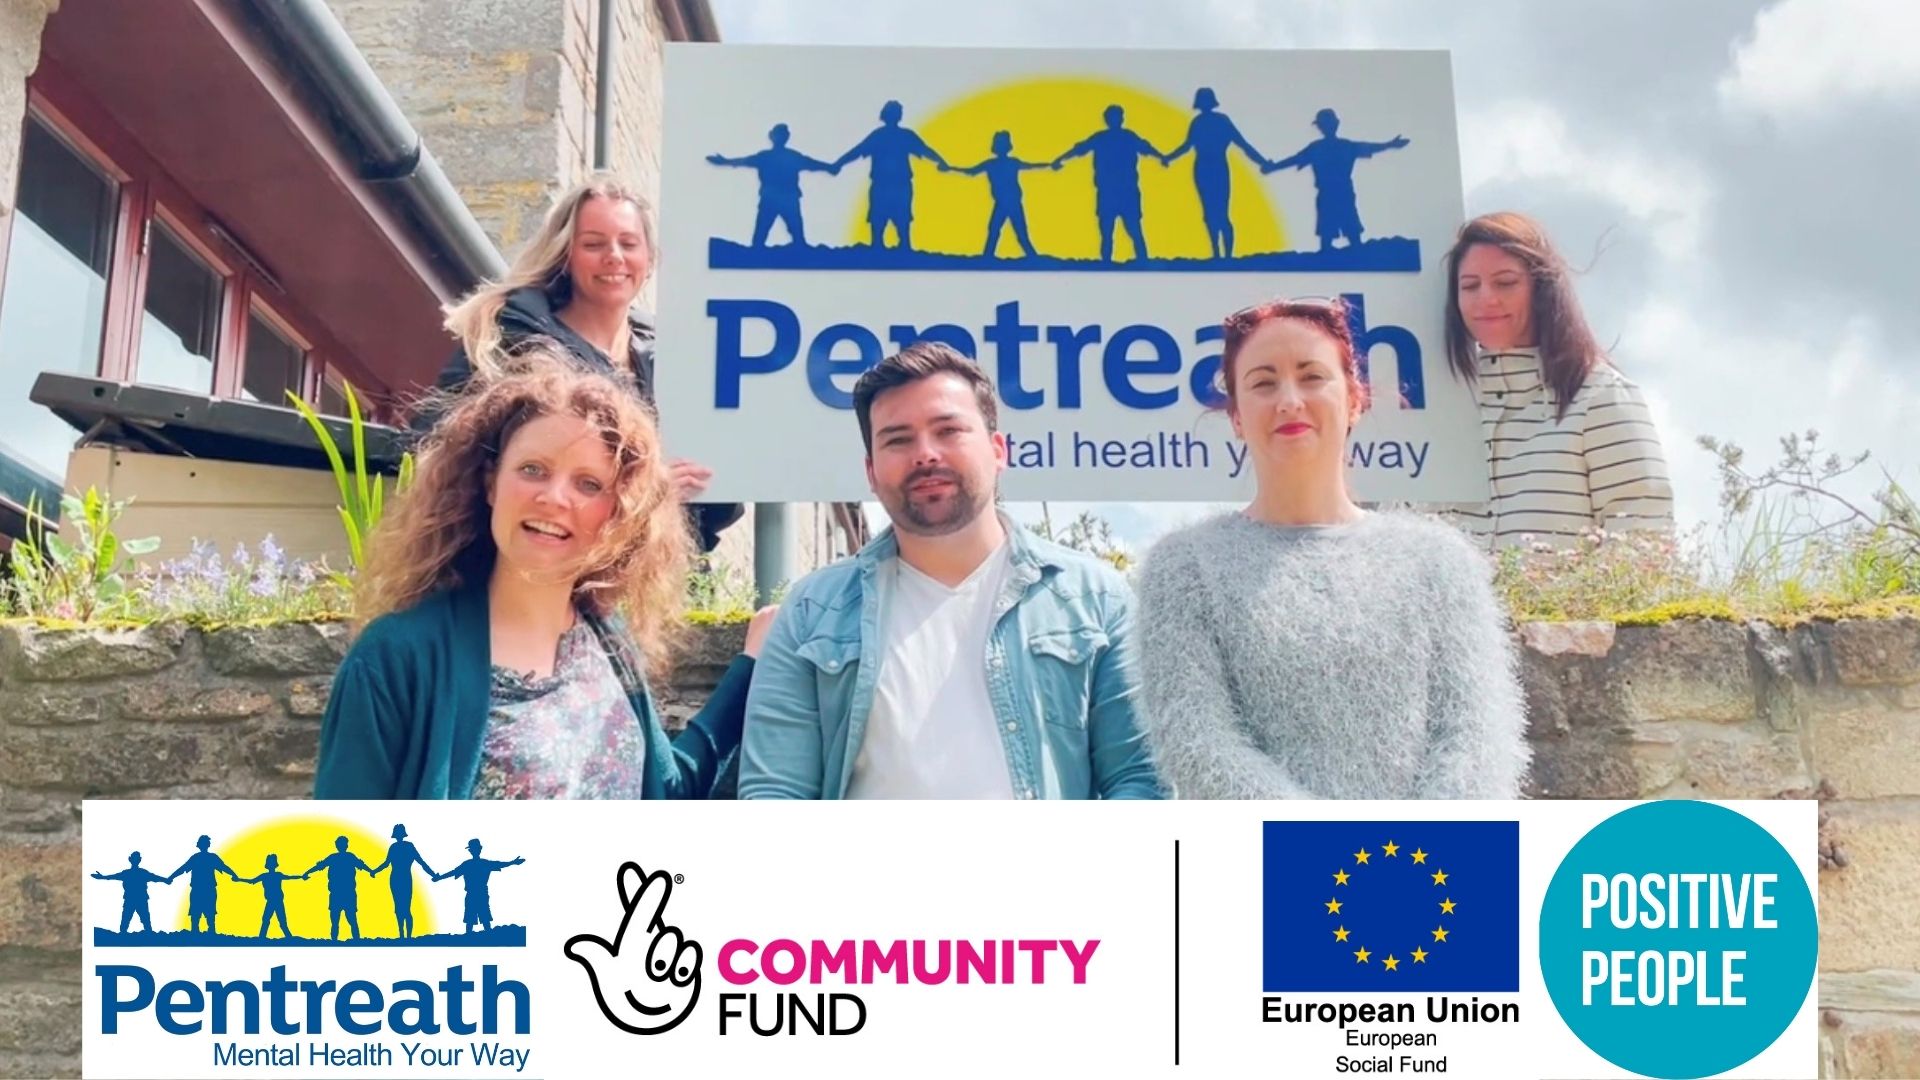 The Positive People team at Pentreath